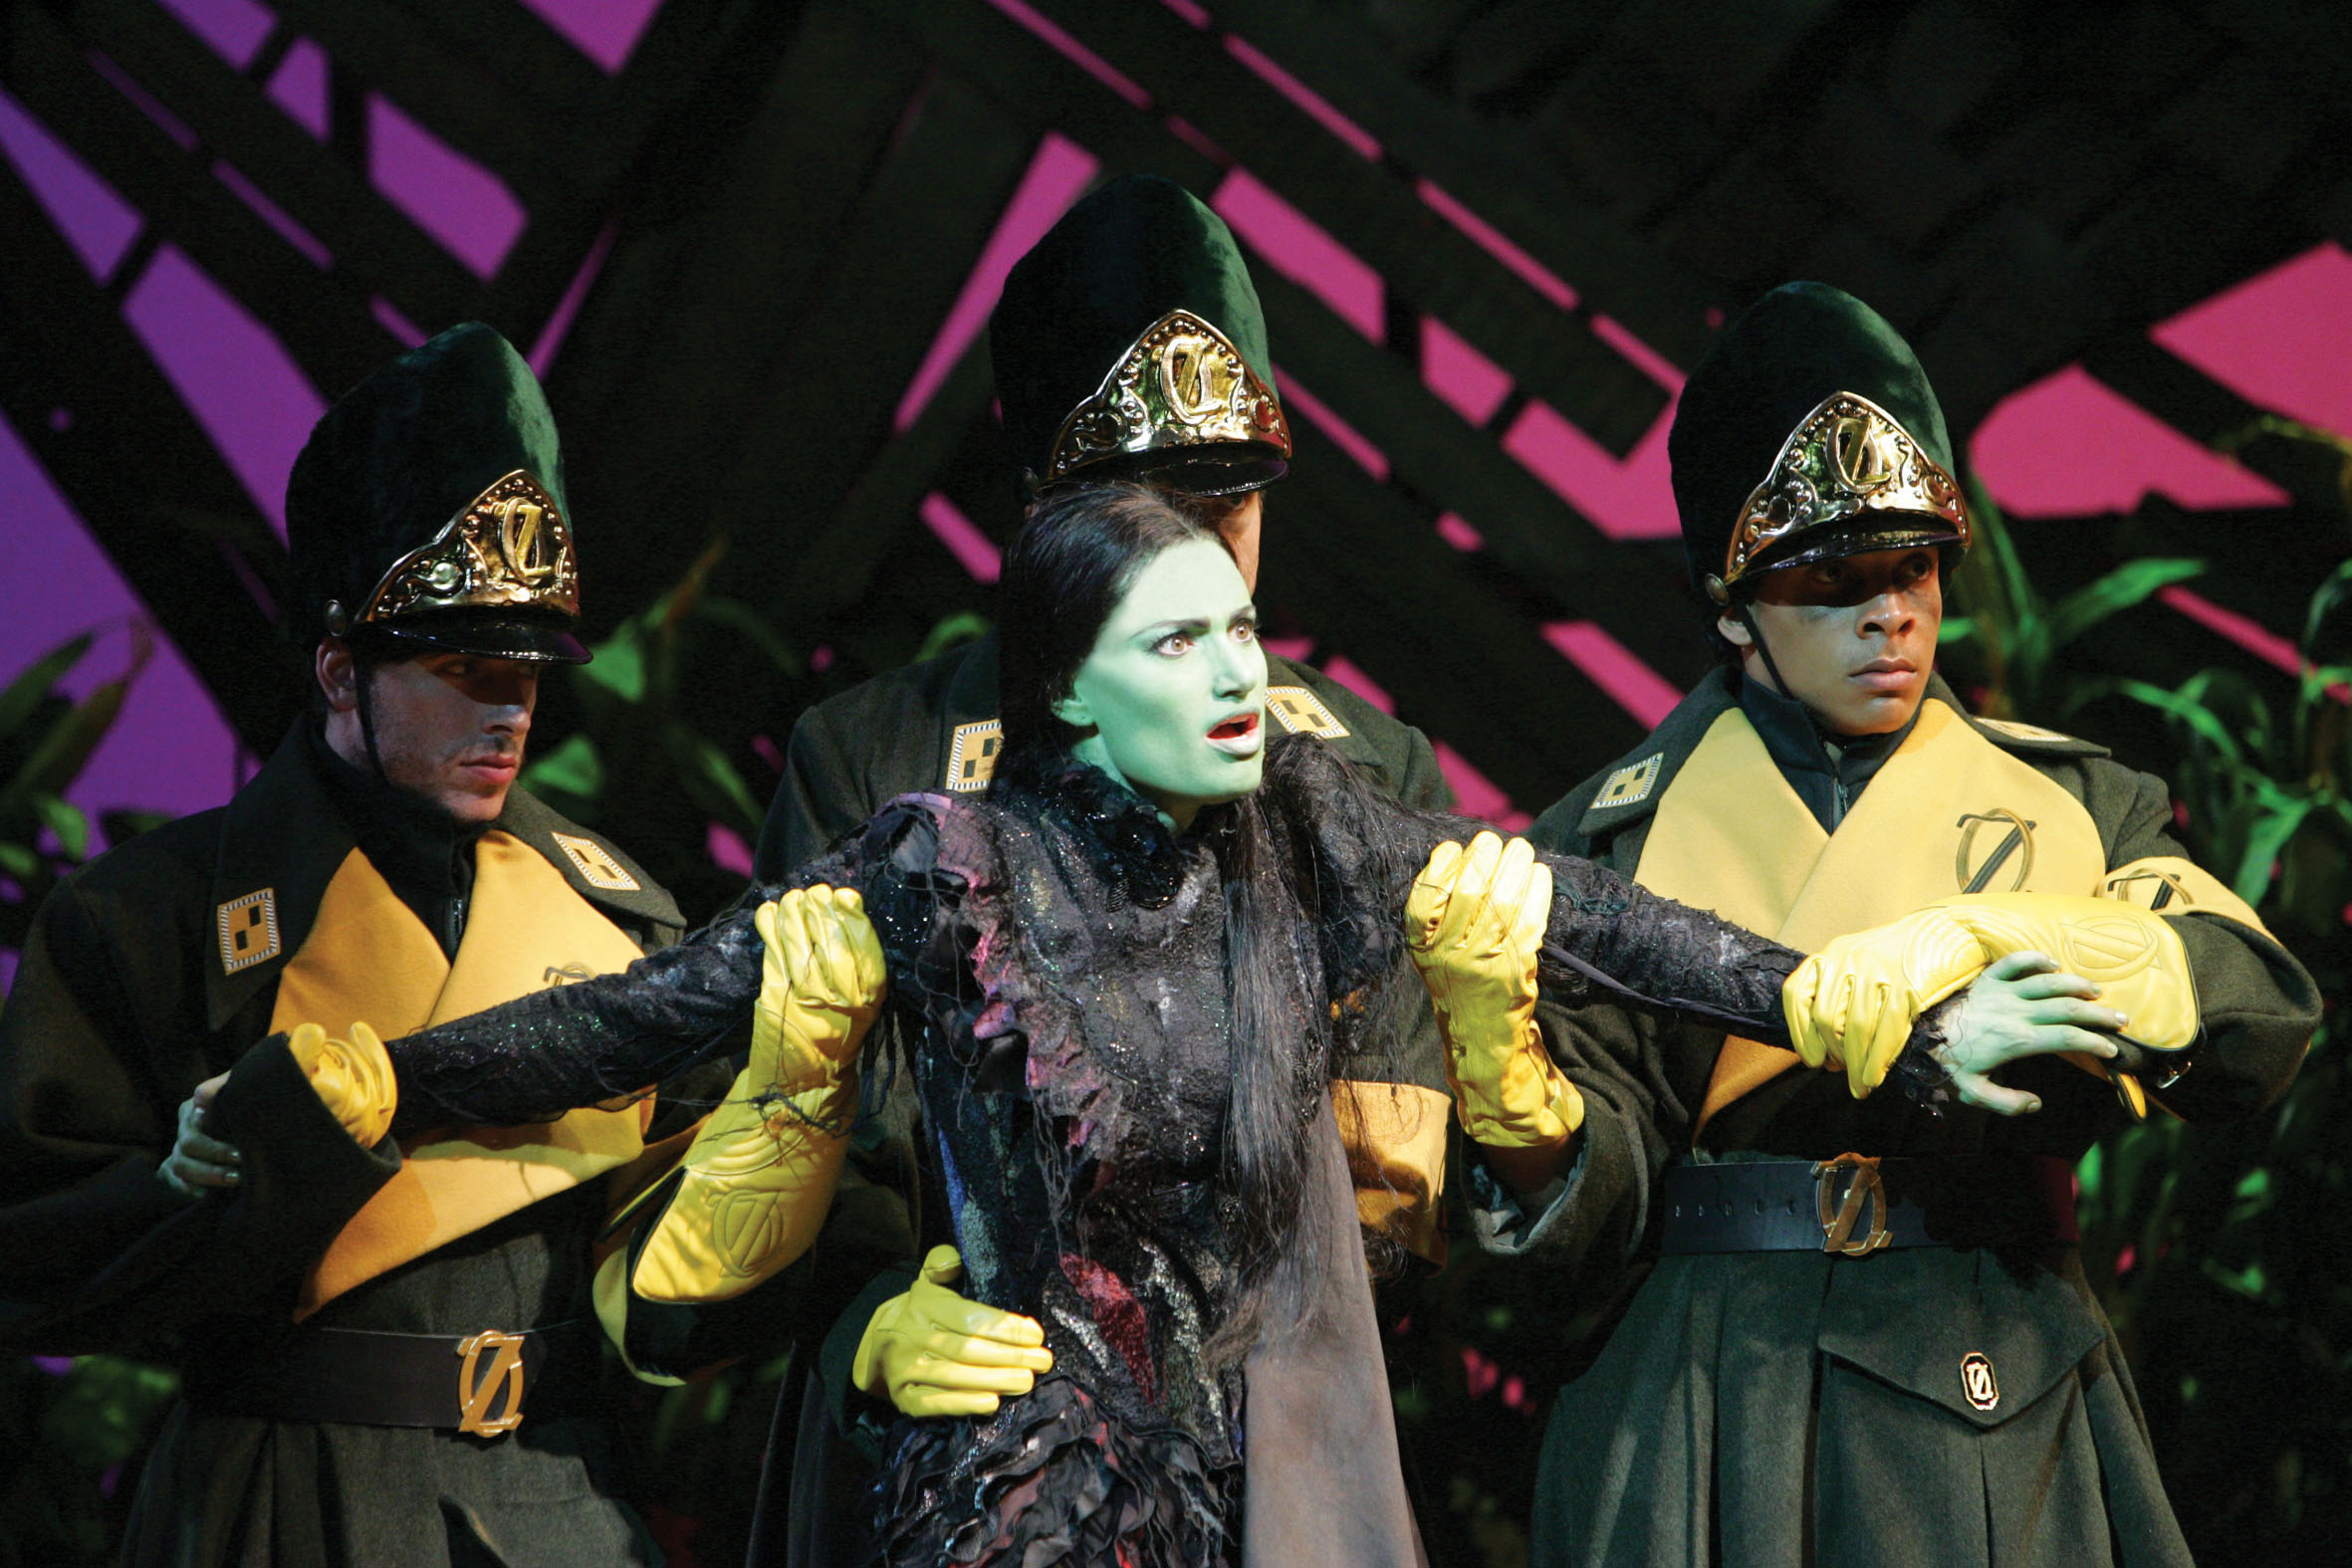 'Wicked' Movie Musical to Fly Into Theaters Christmas 2021 - Bloomberg